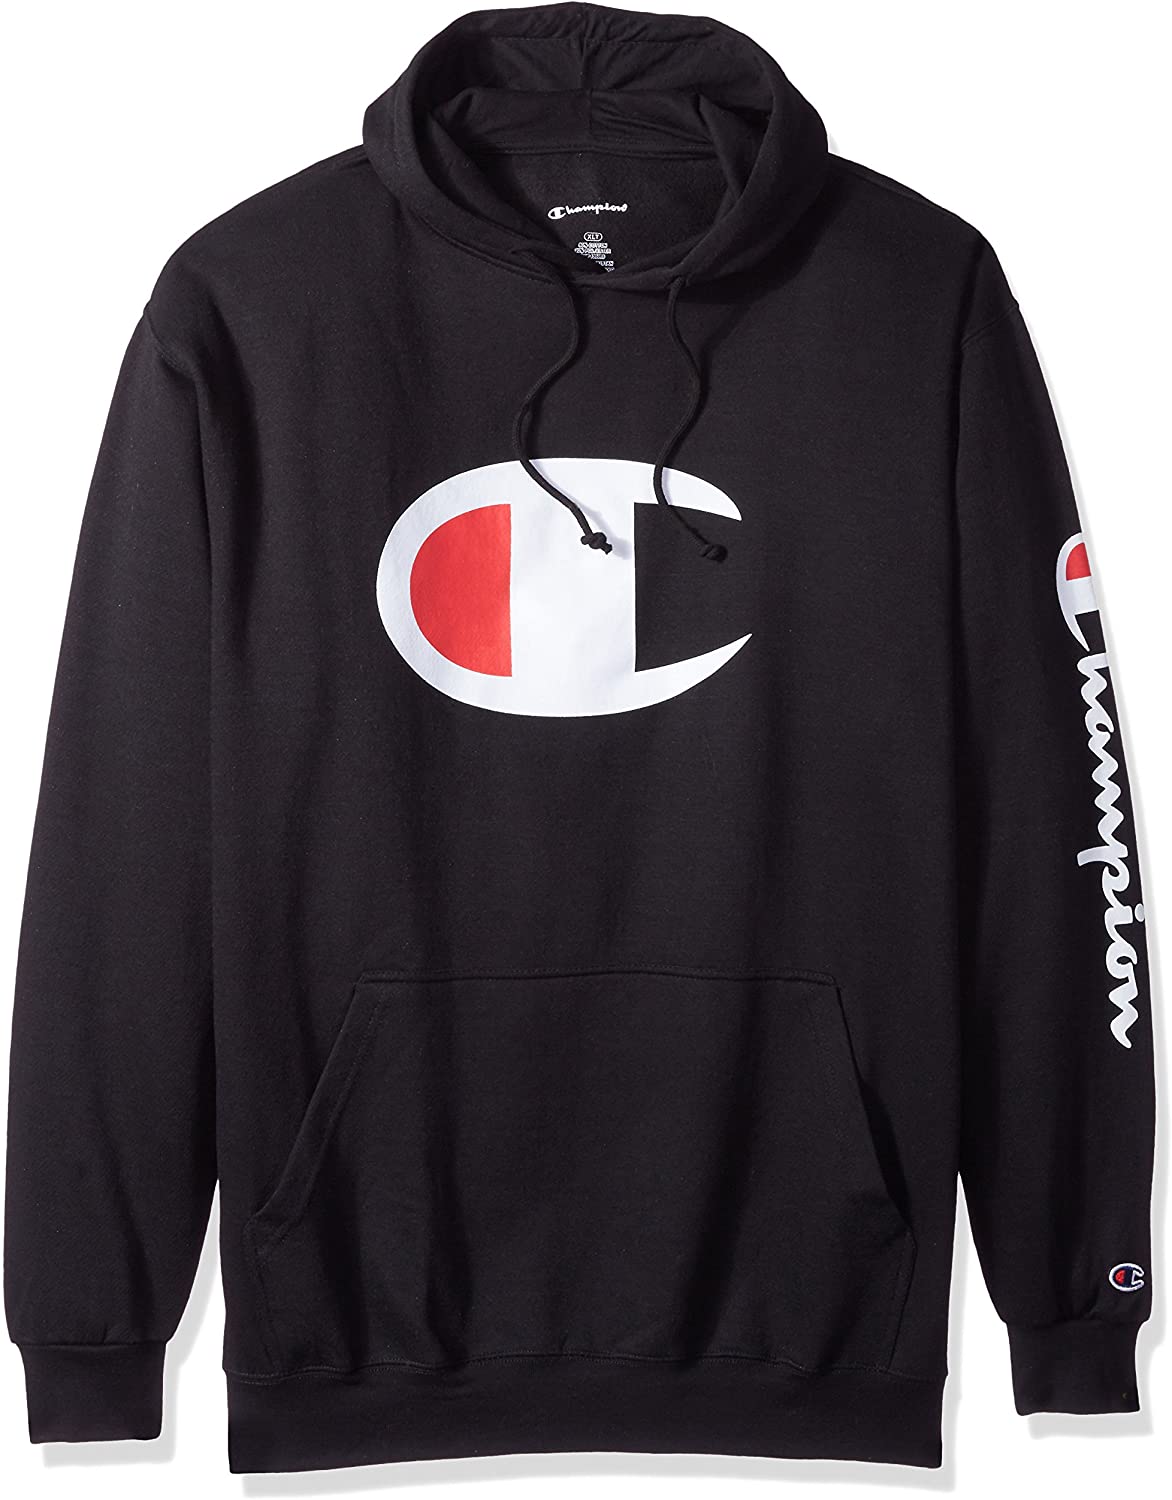 Champion Hoodie Men Big And Tall Hoodies For Men Pullover Champion ...